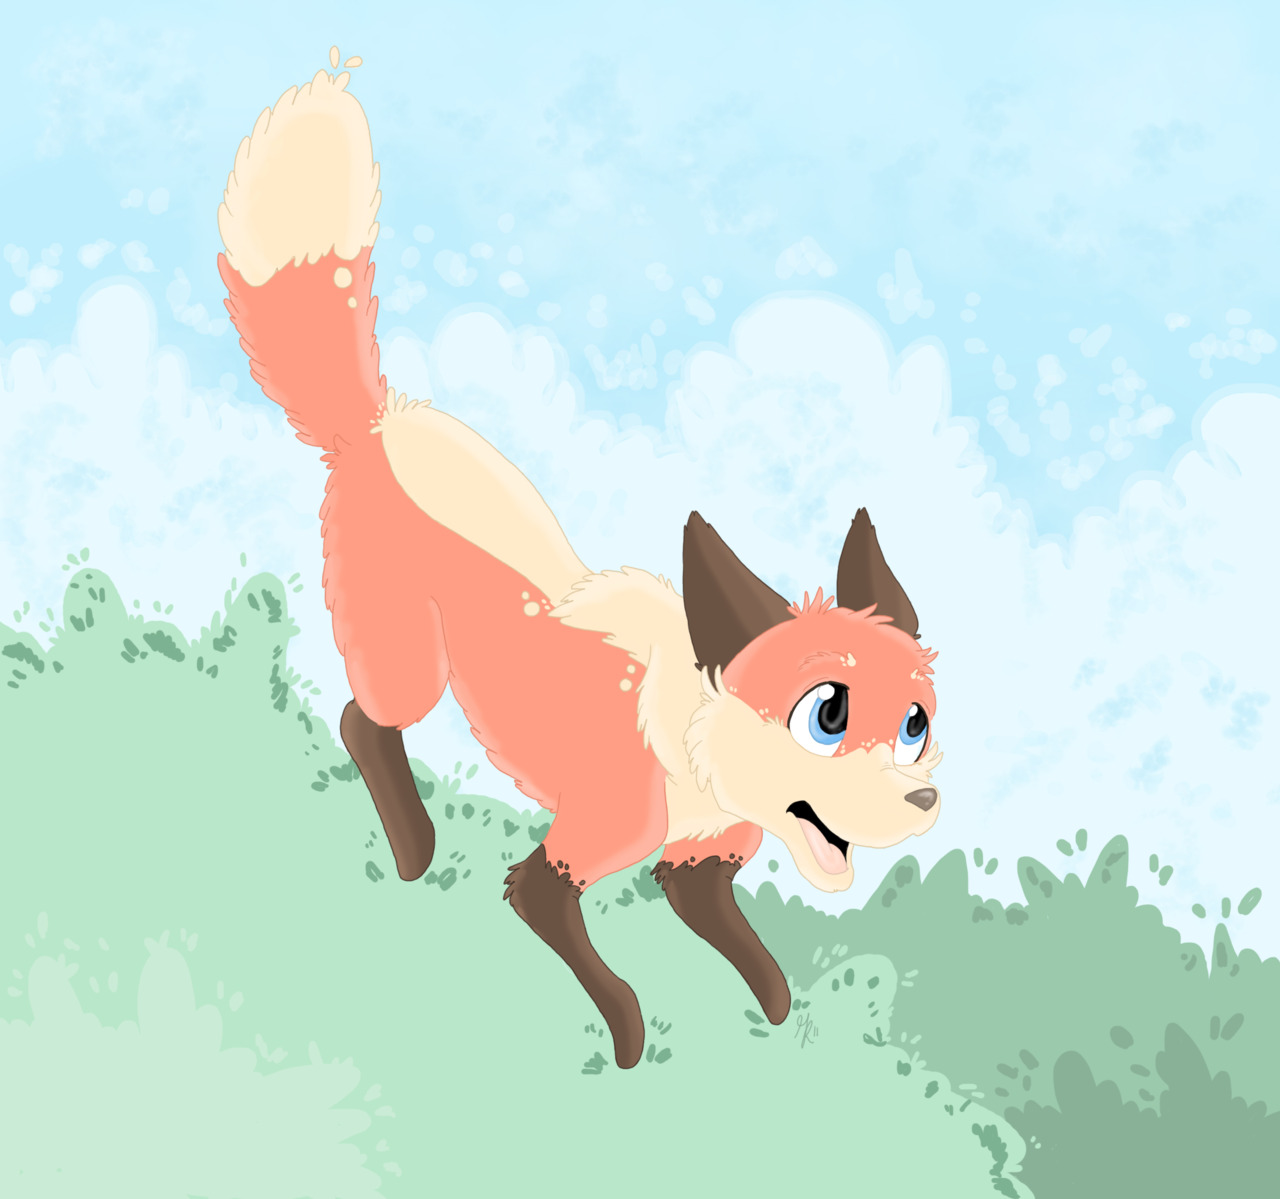 Fox thing by gillustrations